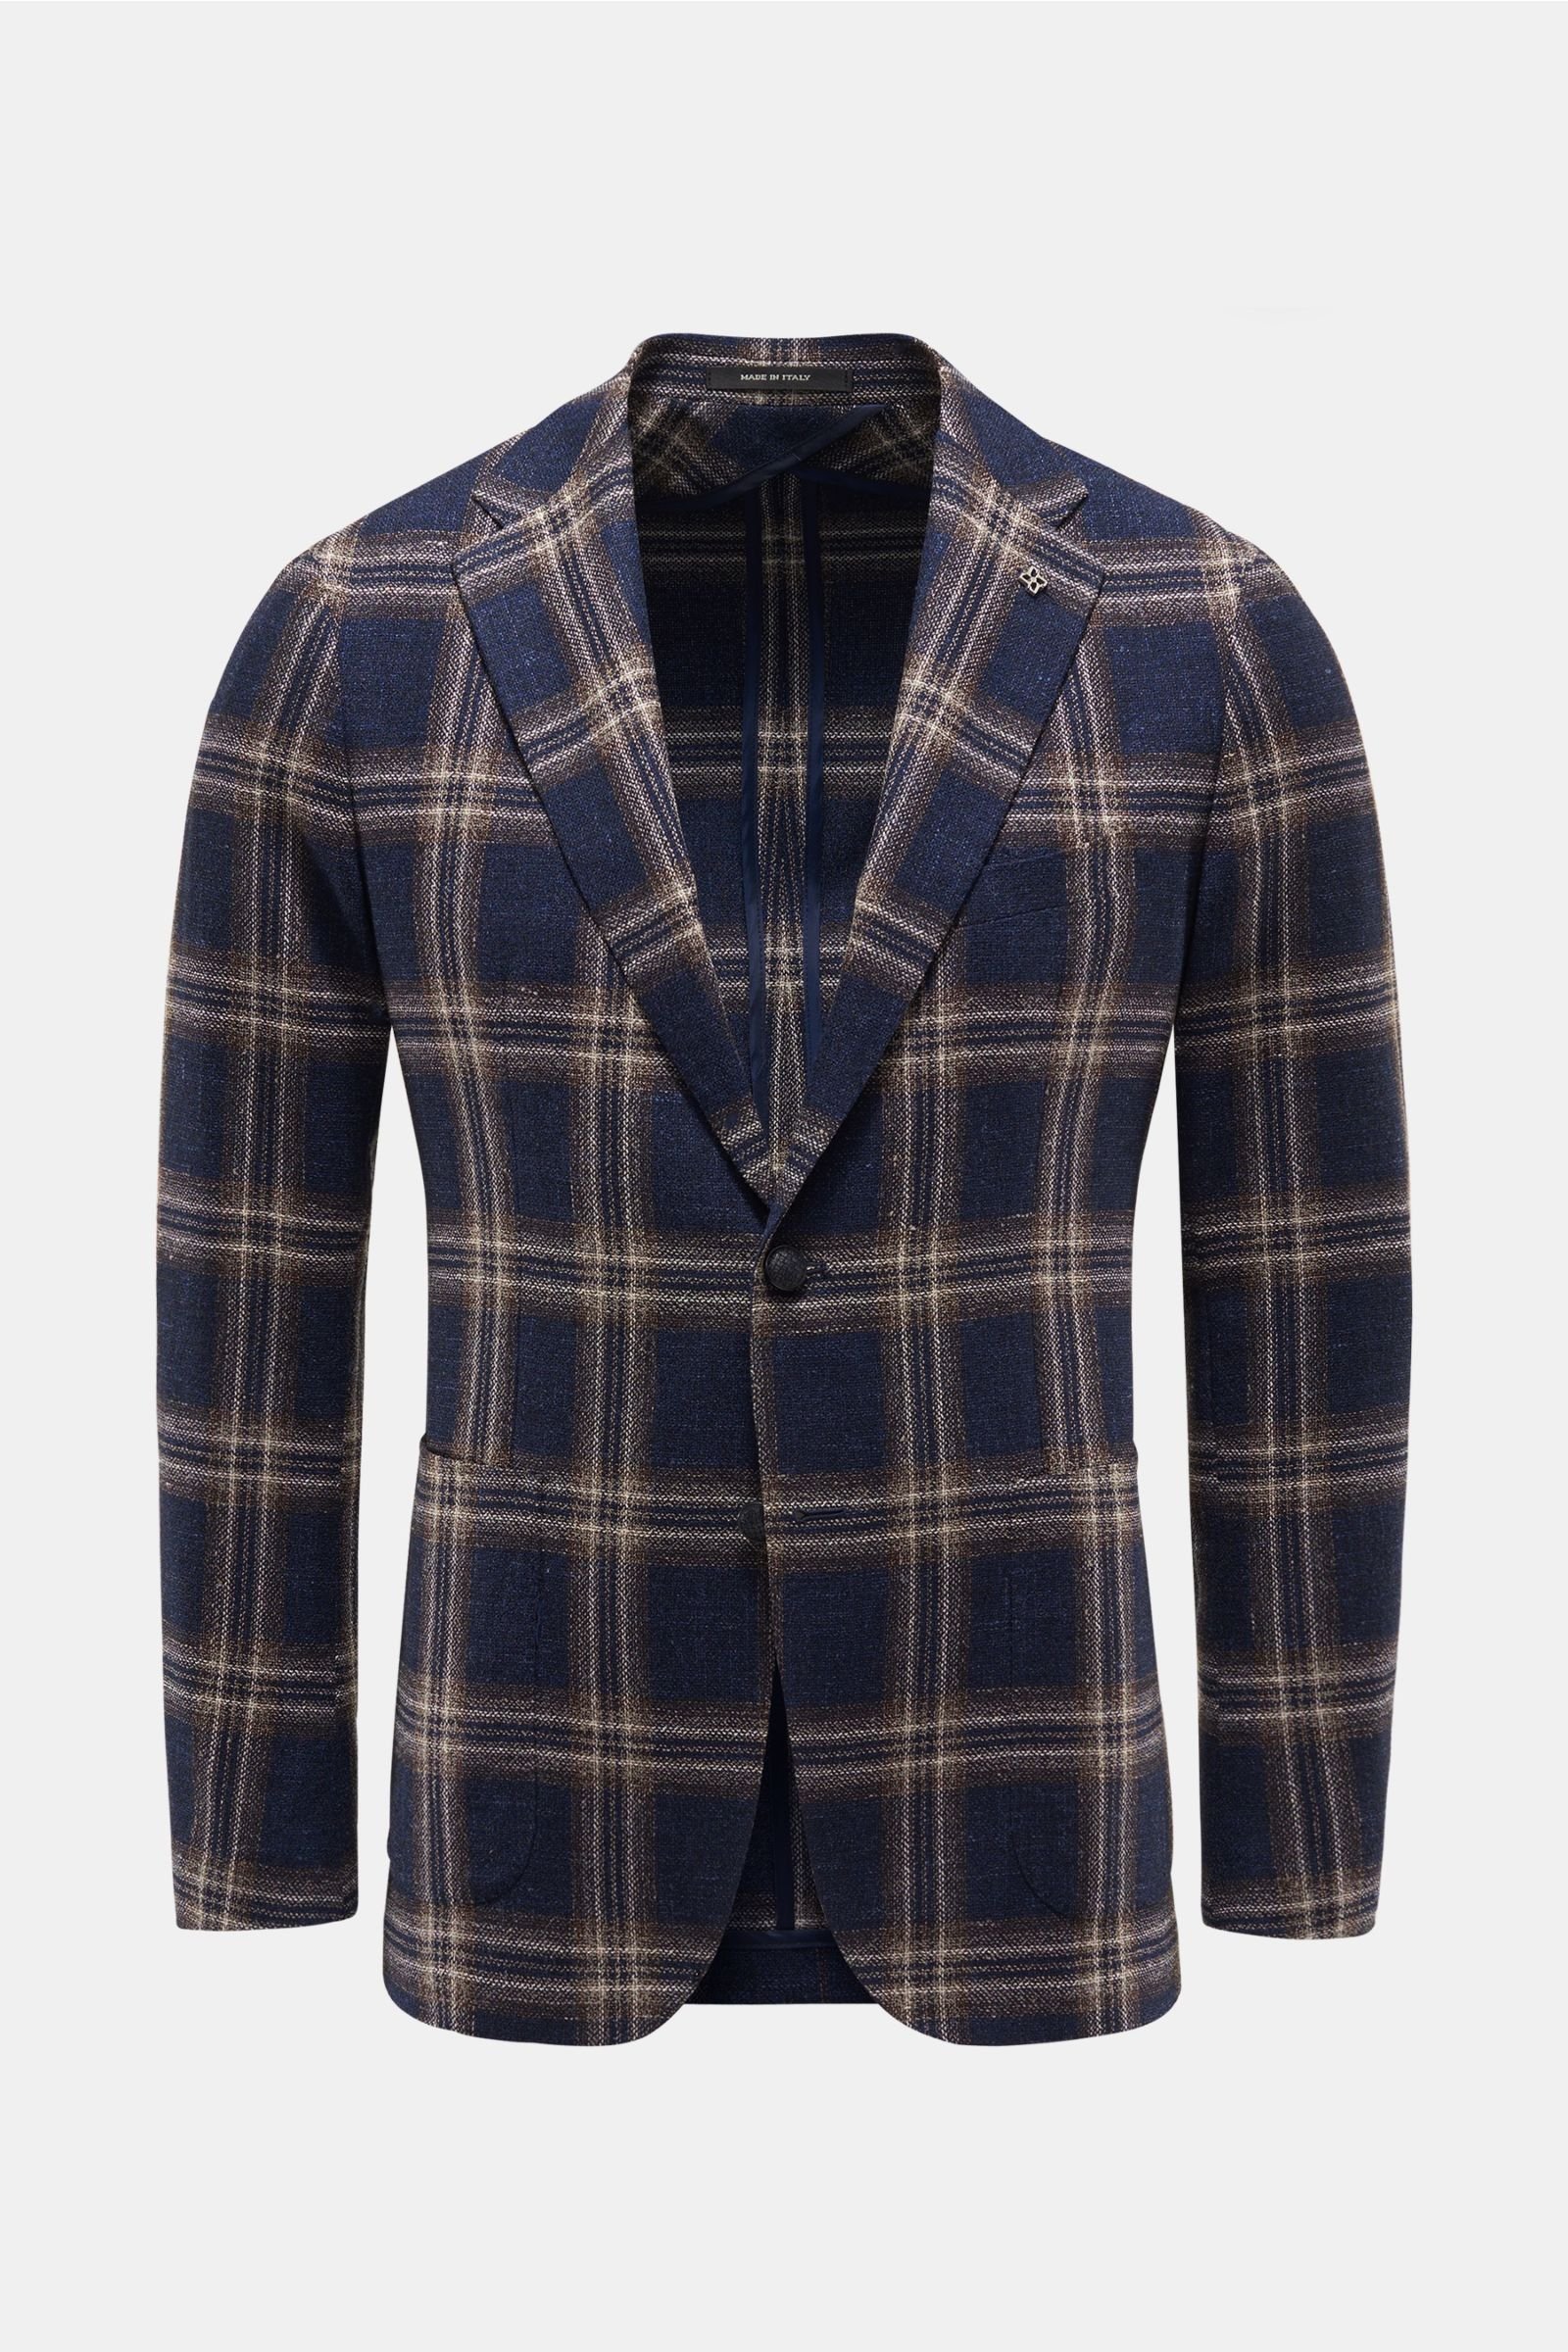 Smart-casual jacket navy/light brown checked